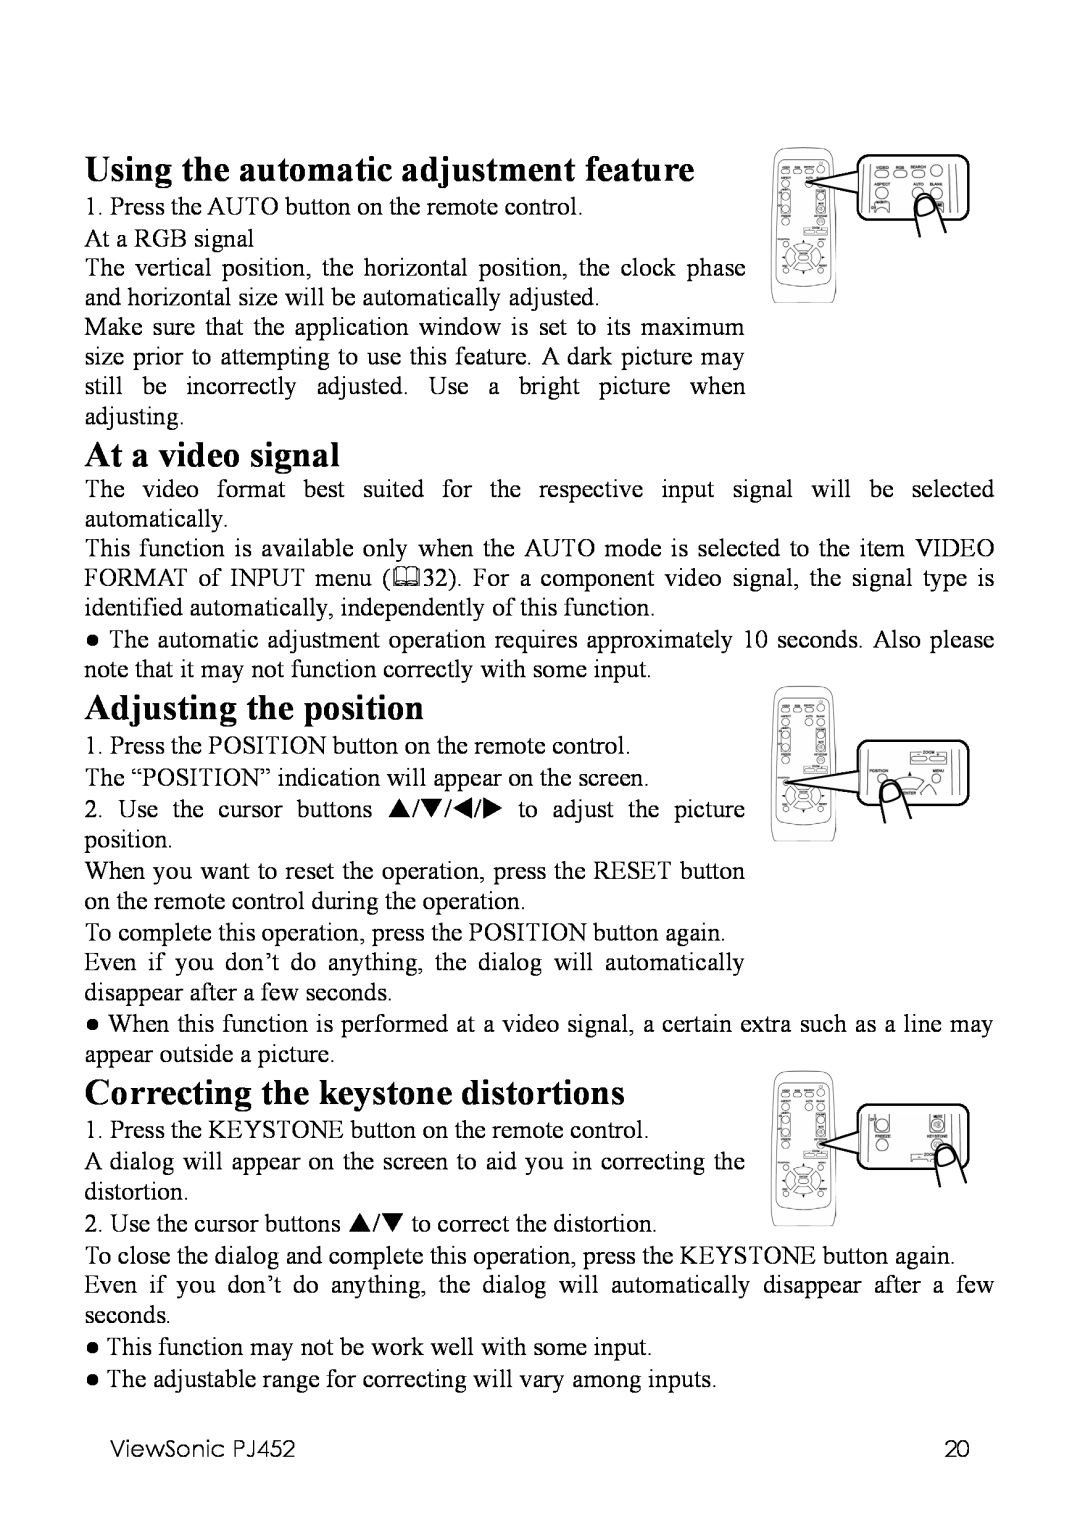 ViewSonic manual Using the automatic adjustment feature, At a video signal, Adjusting the position, ViewSonic PJ452 